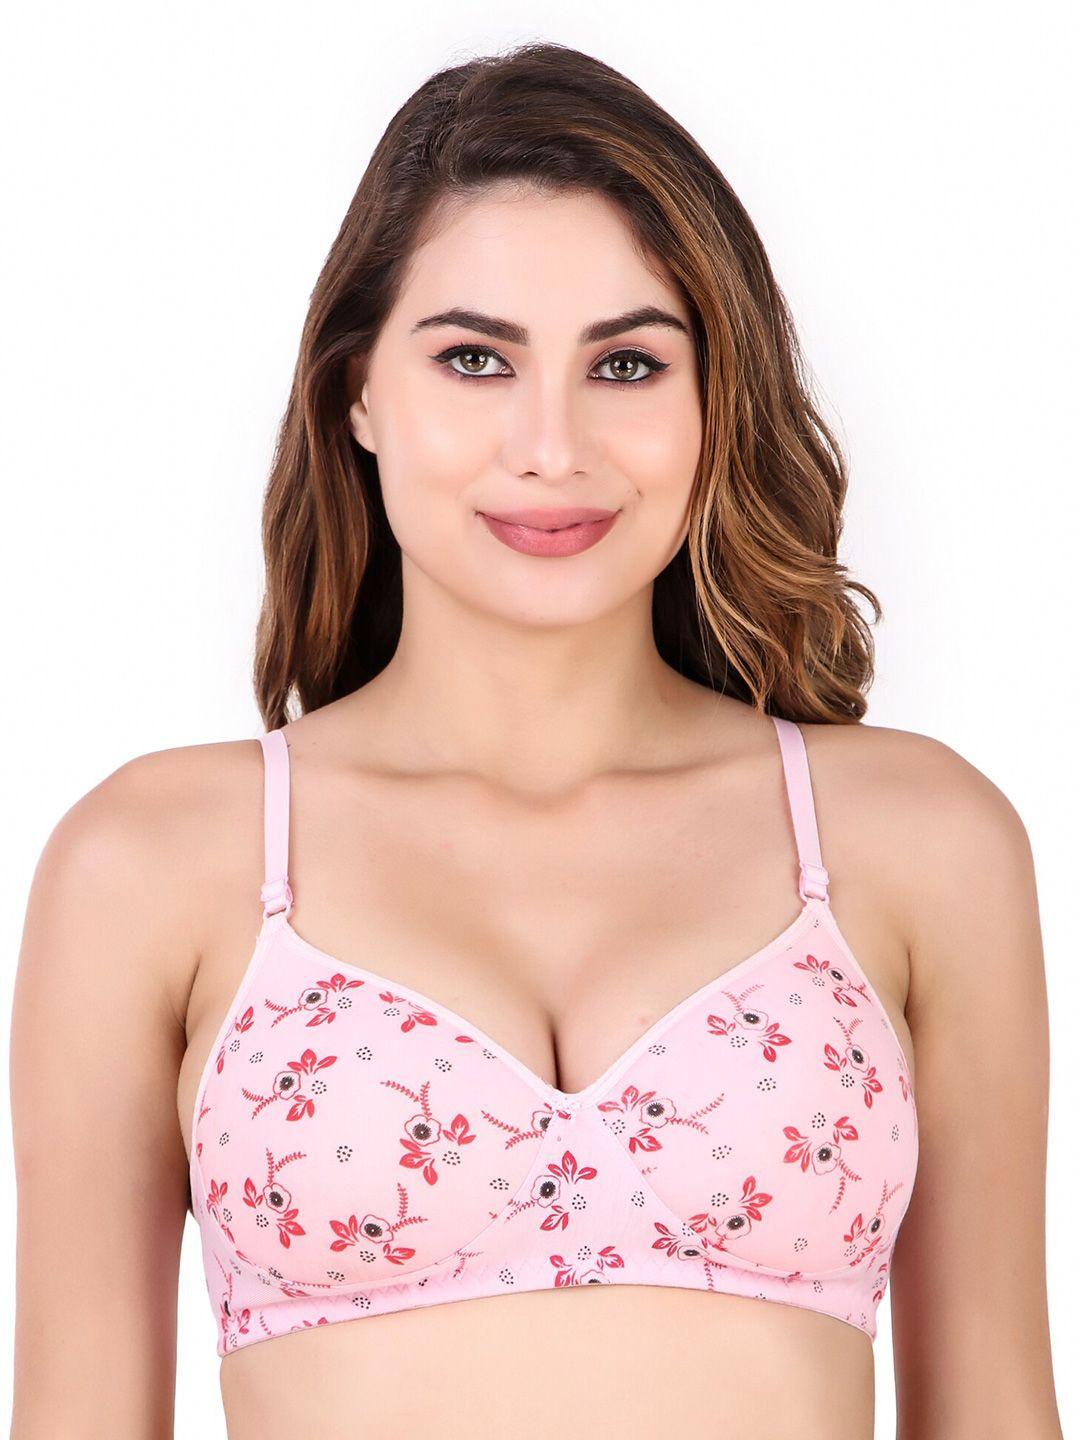 extoes pink & red floral bra full coverage